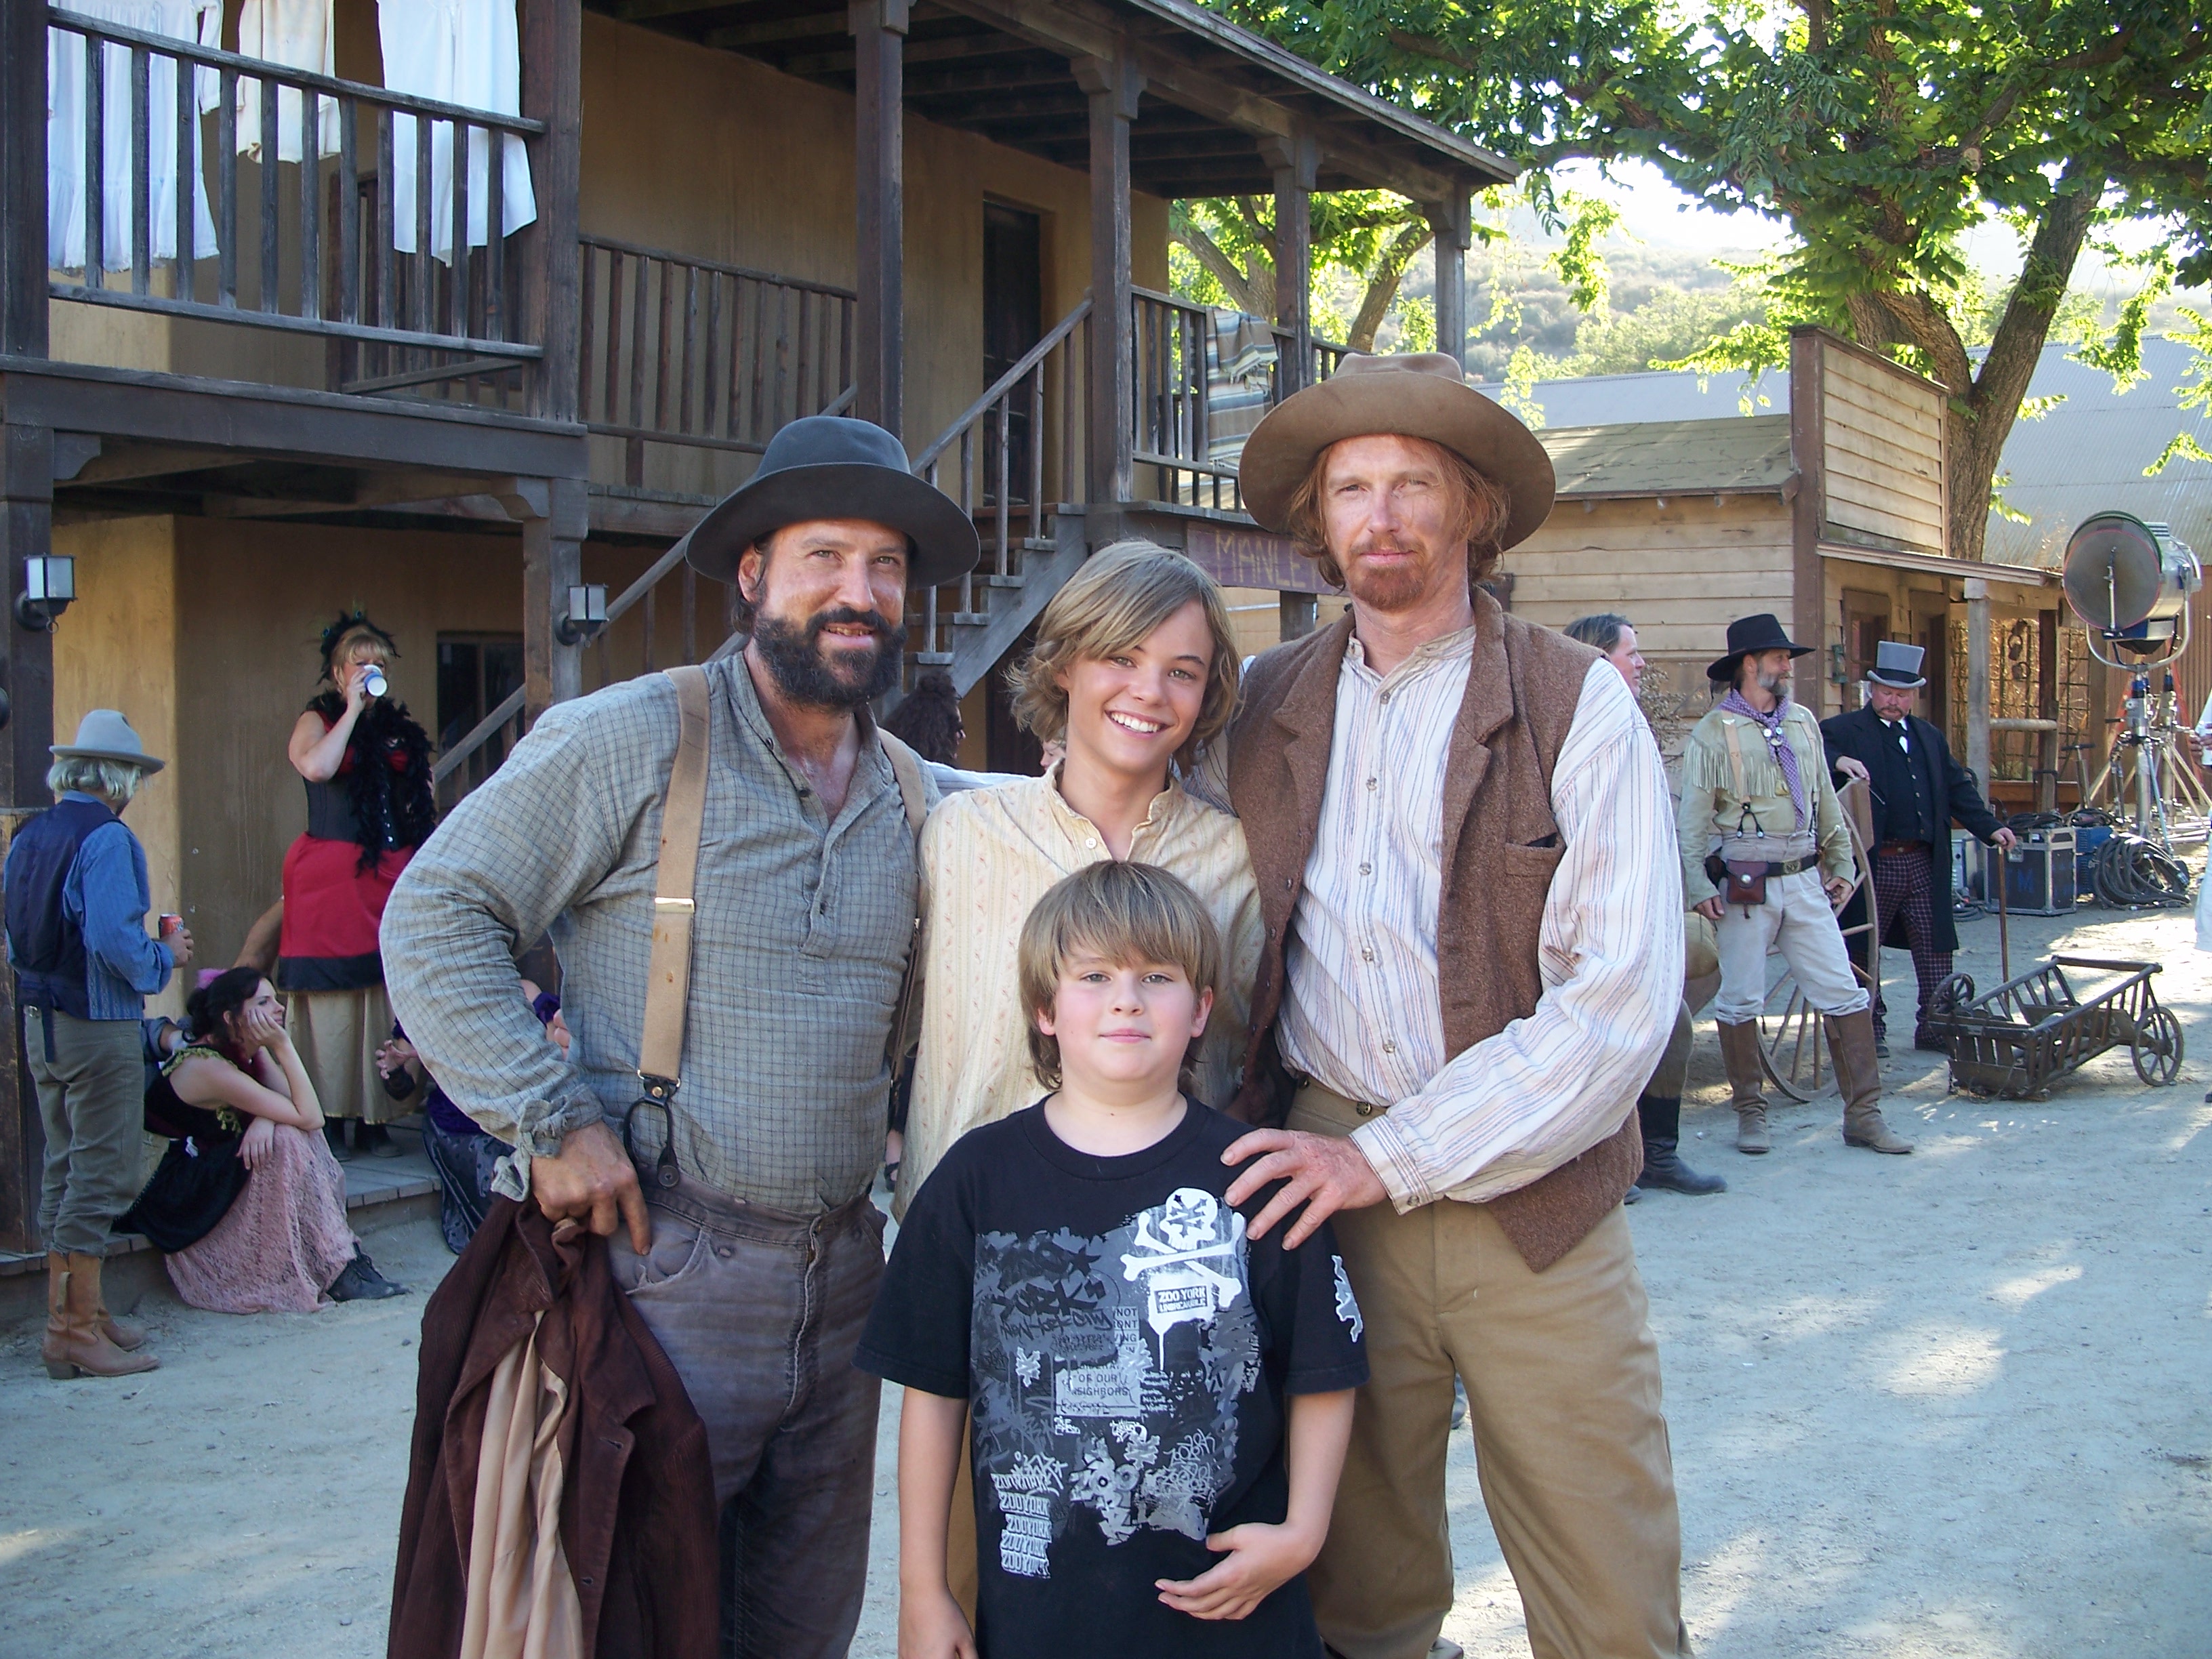 Anthony Michael Jones, Christian Fortune, Courtney Gaines and Parris Fortune on the set of Shadowheart.